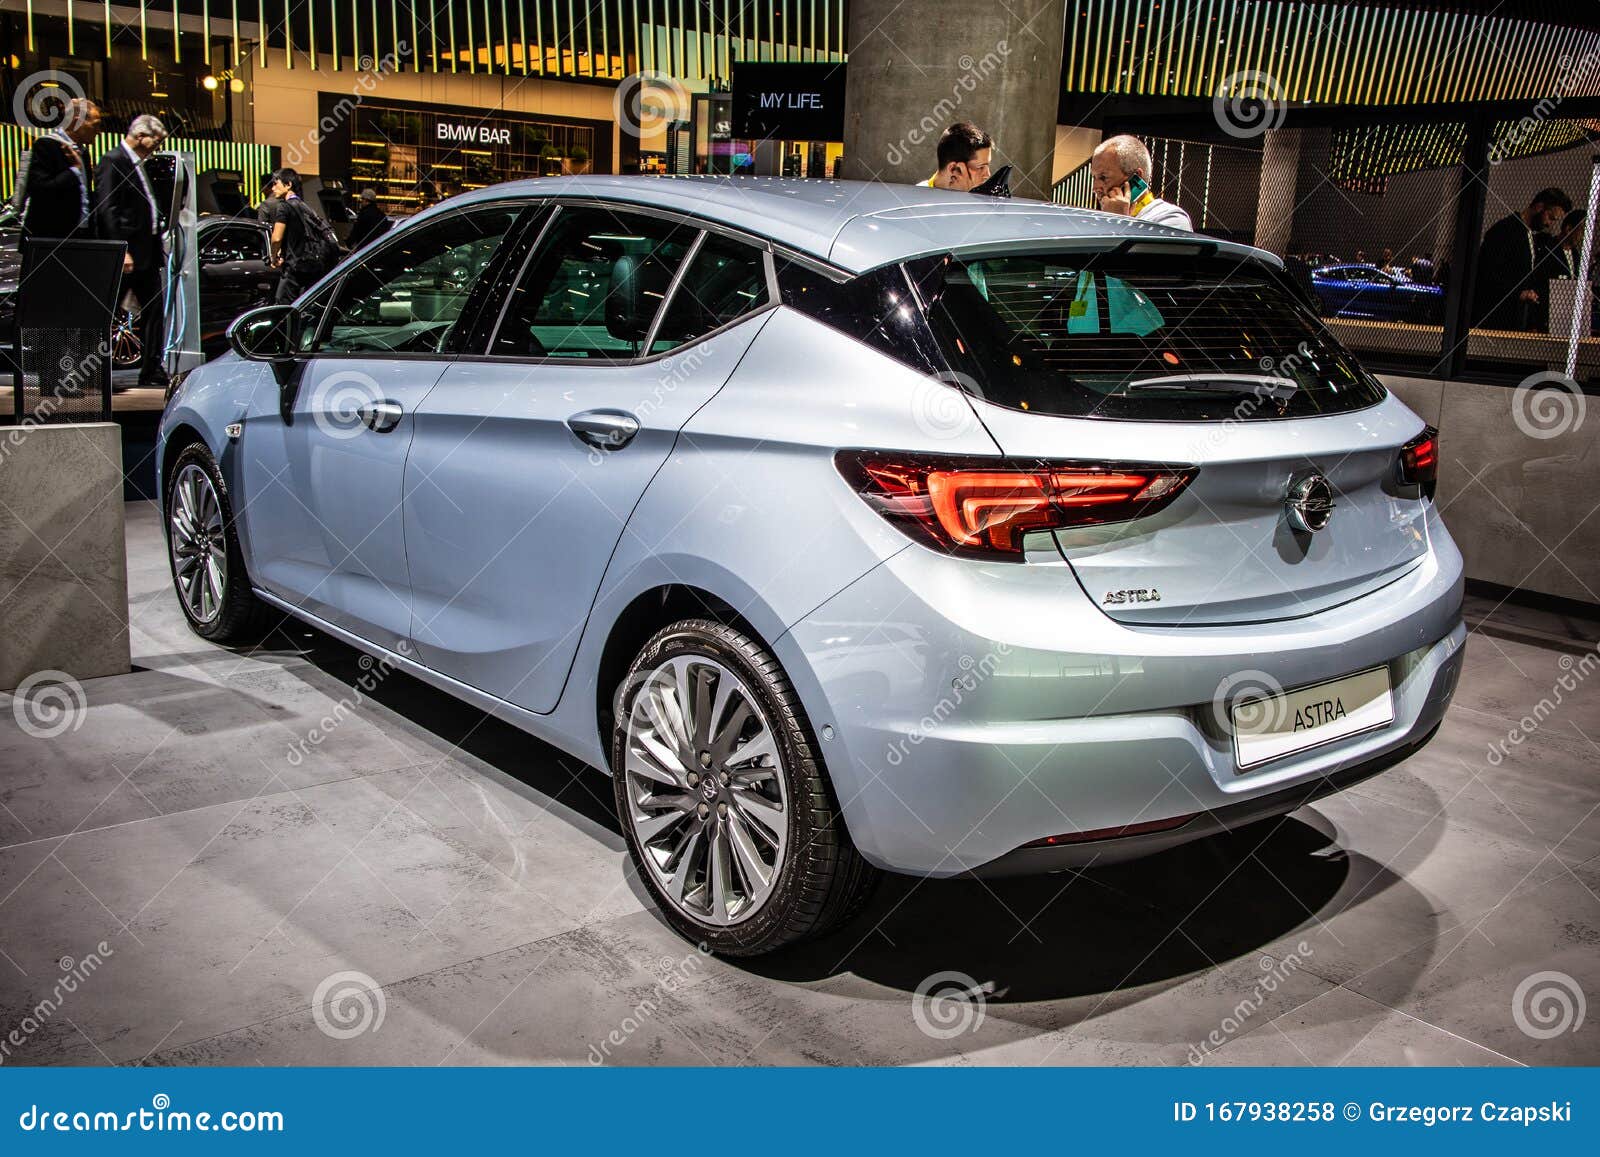 OPEL ASTRA at IAA, Astra K, Compact Small Family Car Manufactured by Opel  Editorial Stock Photo - Image of auto, modern: 167938258